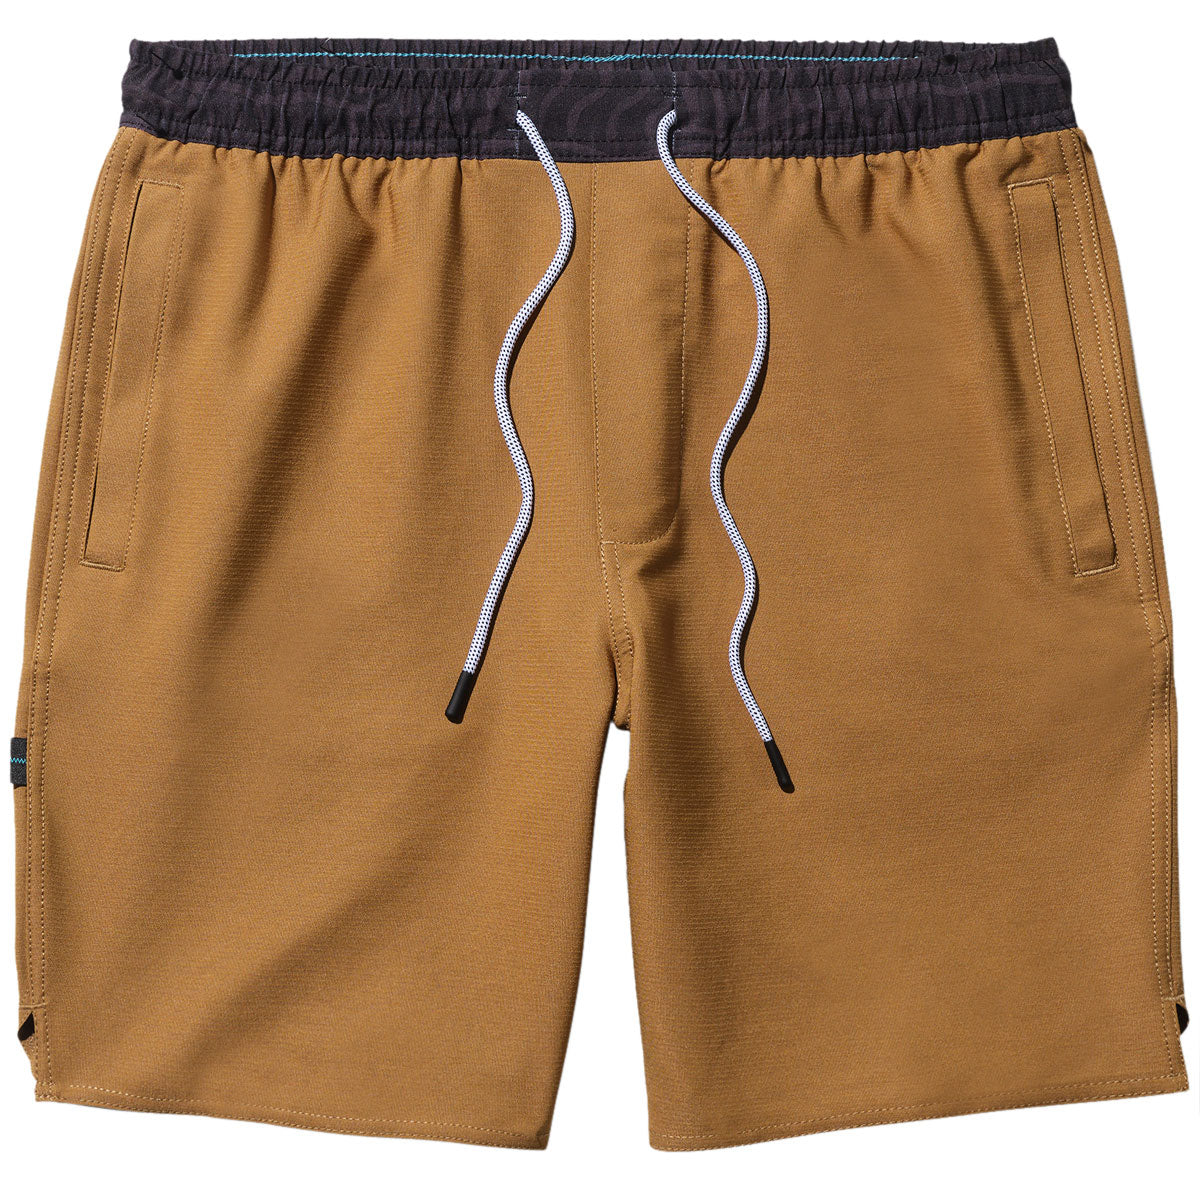 Stance Complex Shorts - Brown image 1